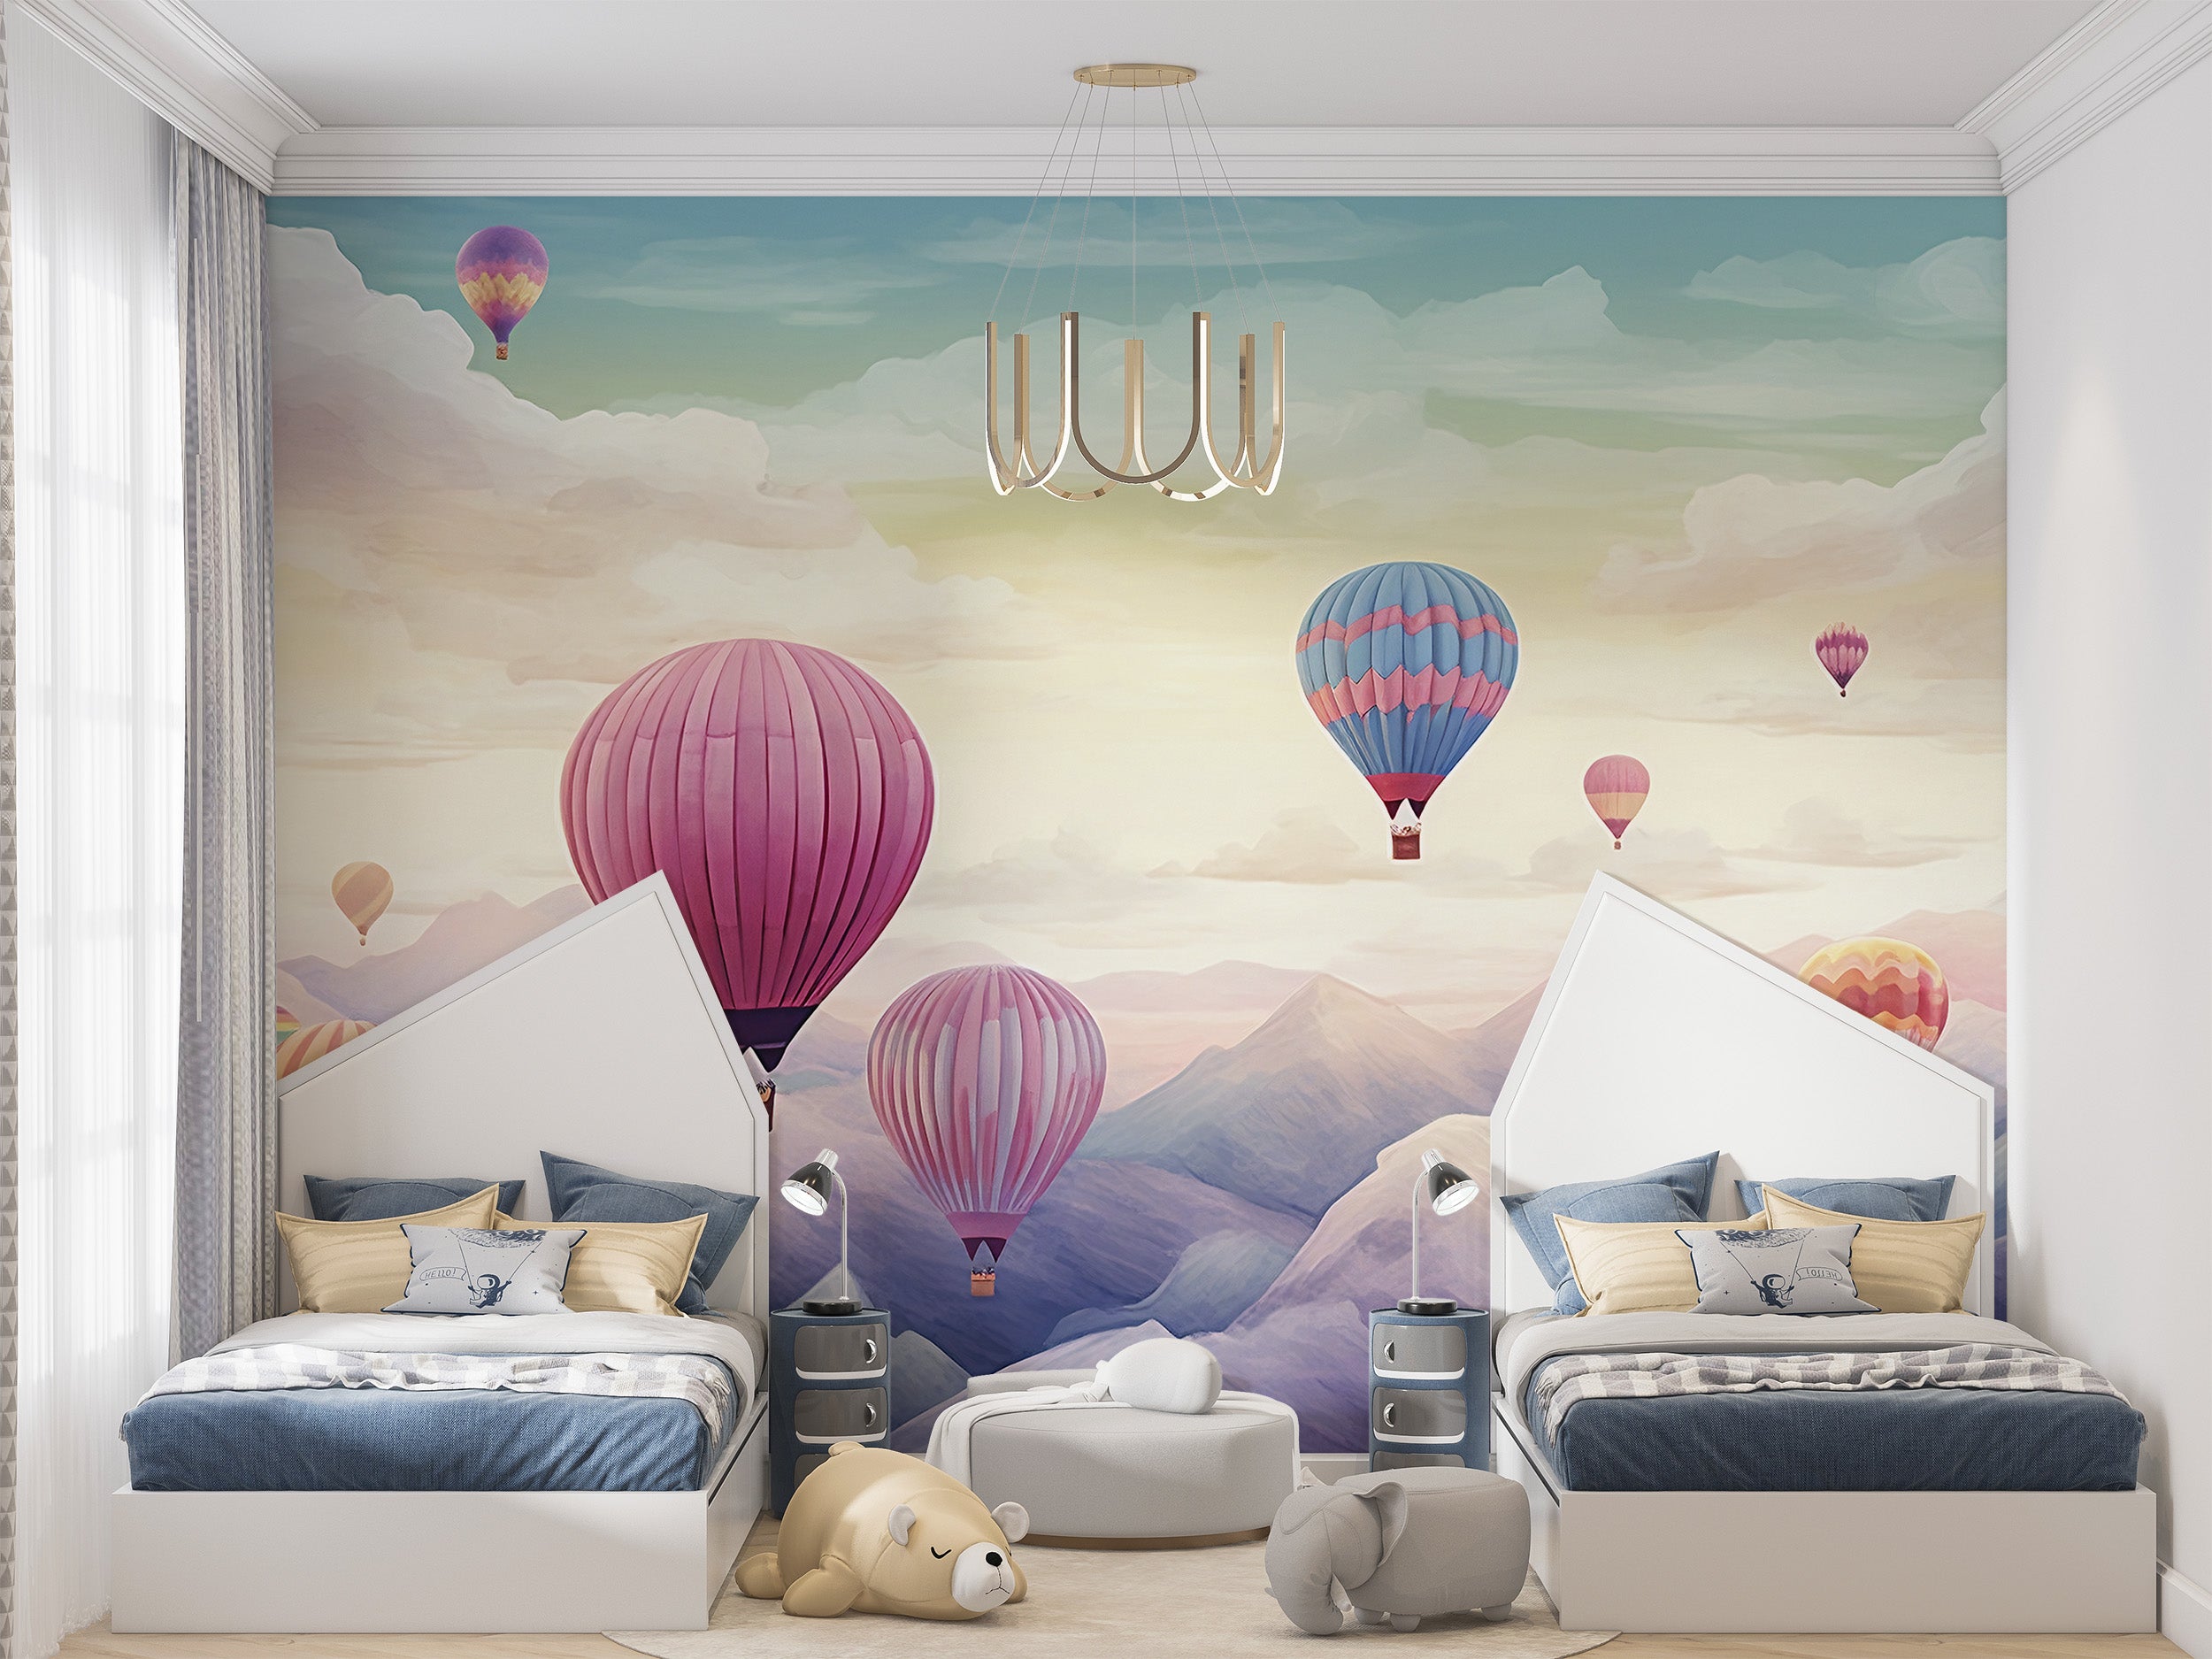 Effortless Application of Adventure-Inspired Wall Covering